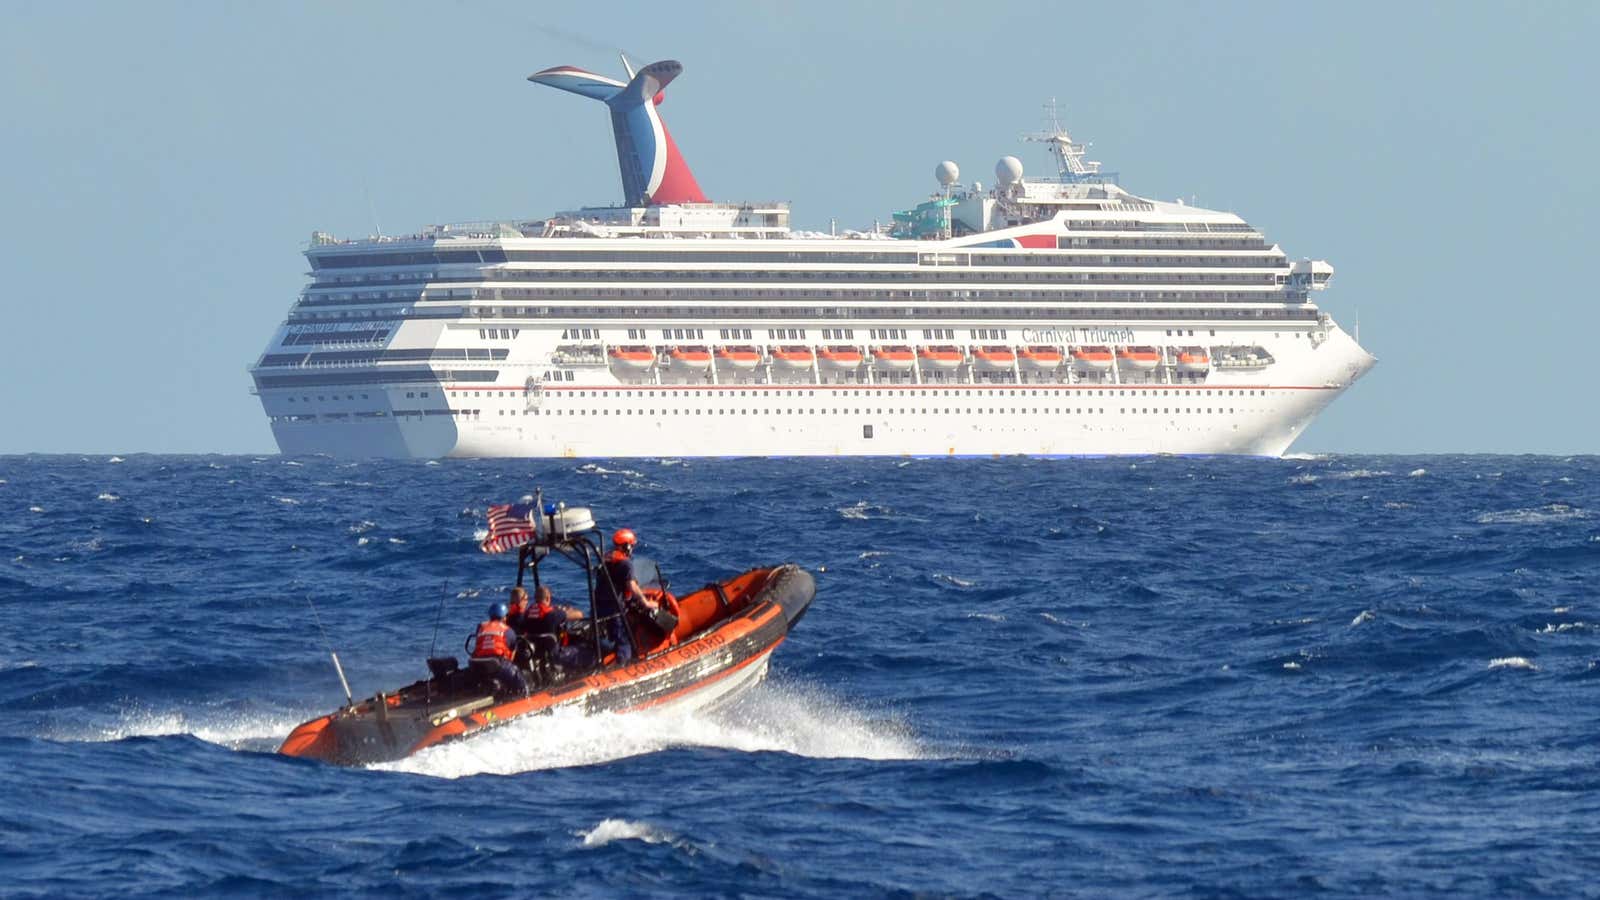 Carnival is lucky it didn’t need the Coast Guard to save its abysmal brand perception.